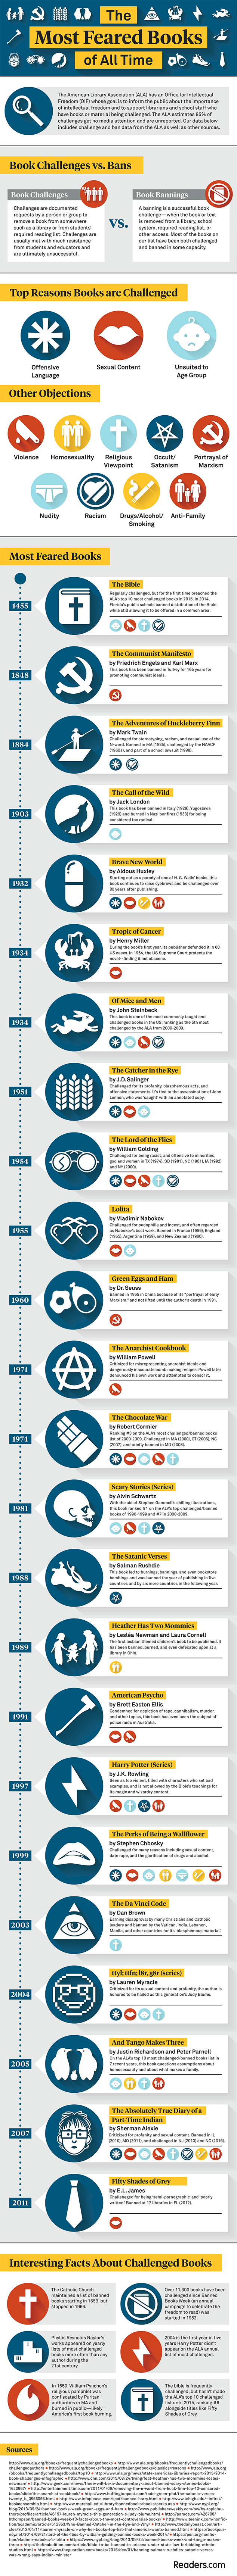 The most feared books of all time infographic - by Readers.com